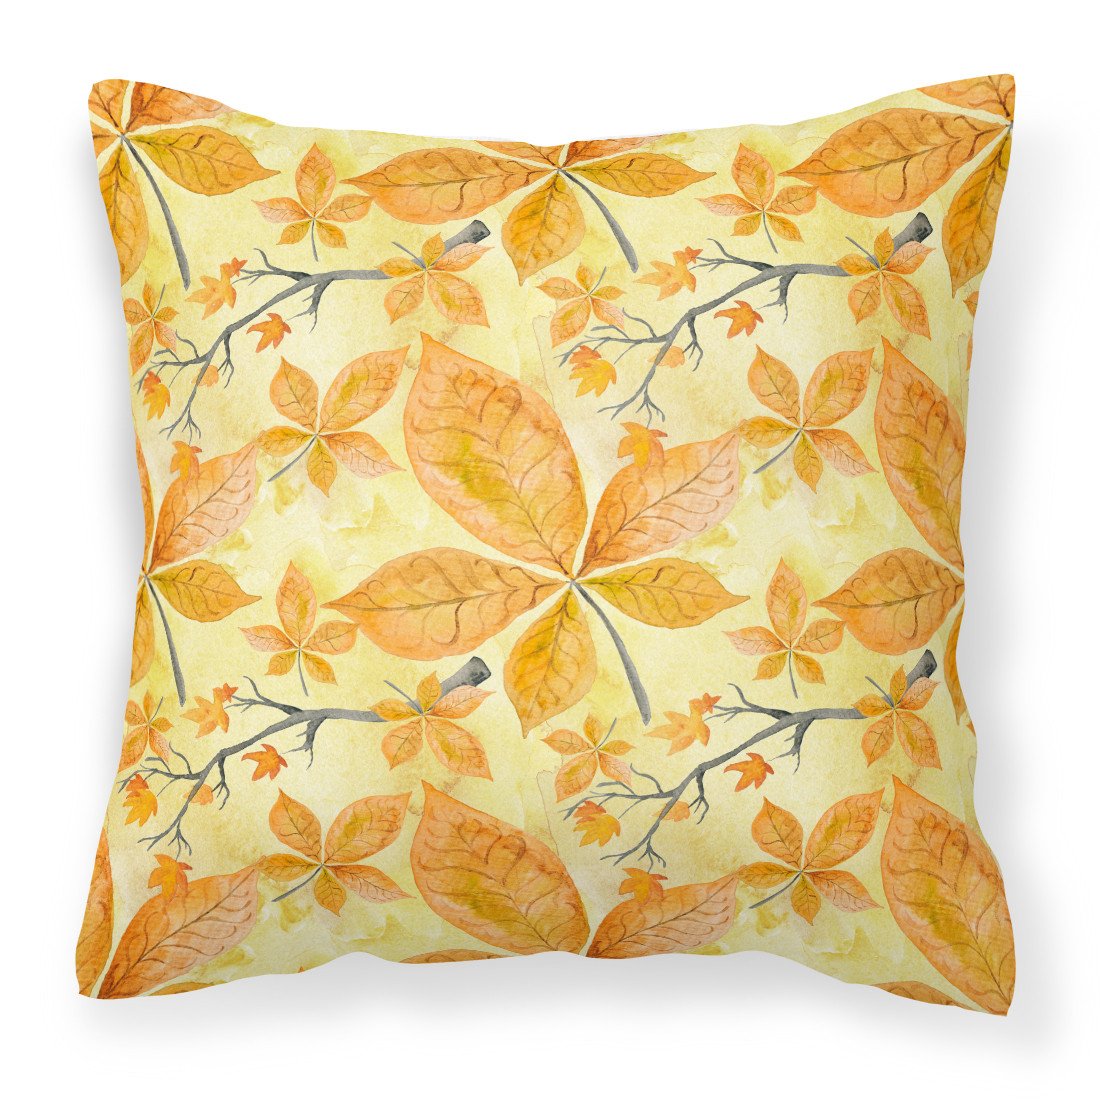 Fall Leaves and Branches Fabric Decorative Pillow BB7495PW1818 by Caroline's Treasures